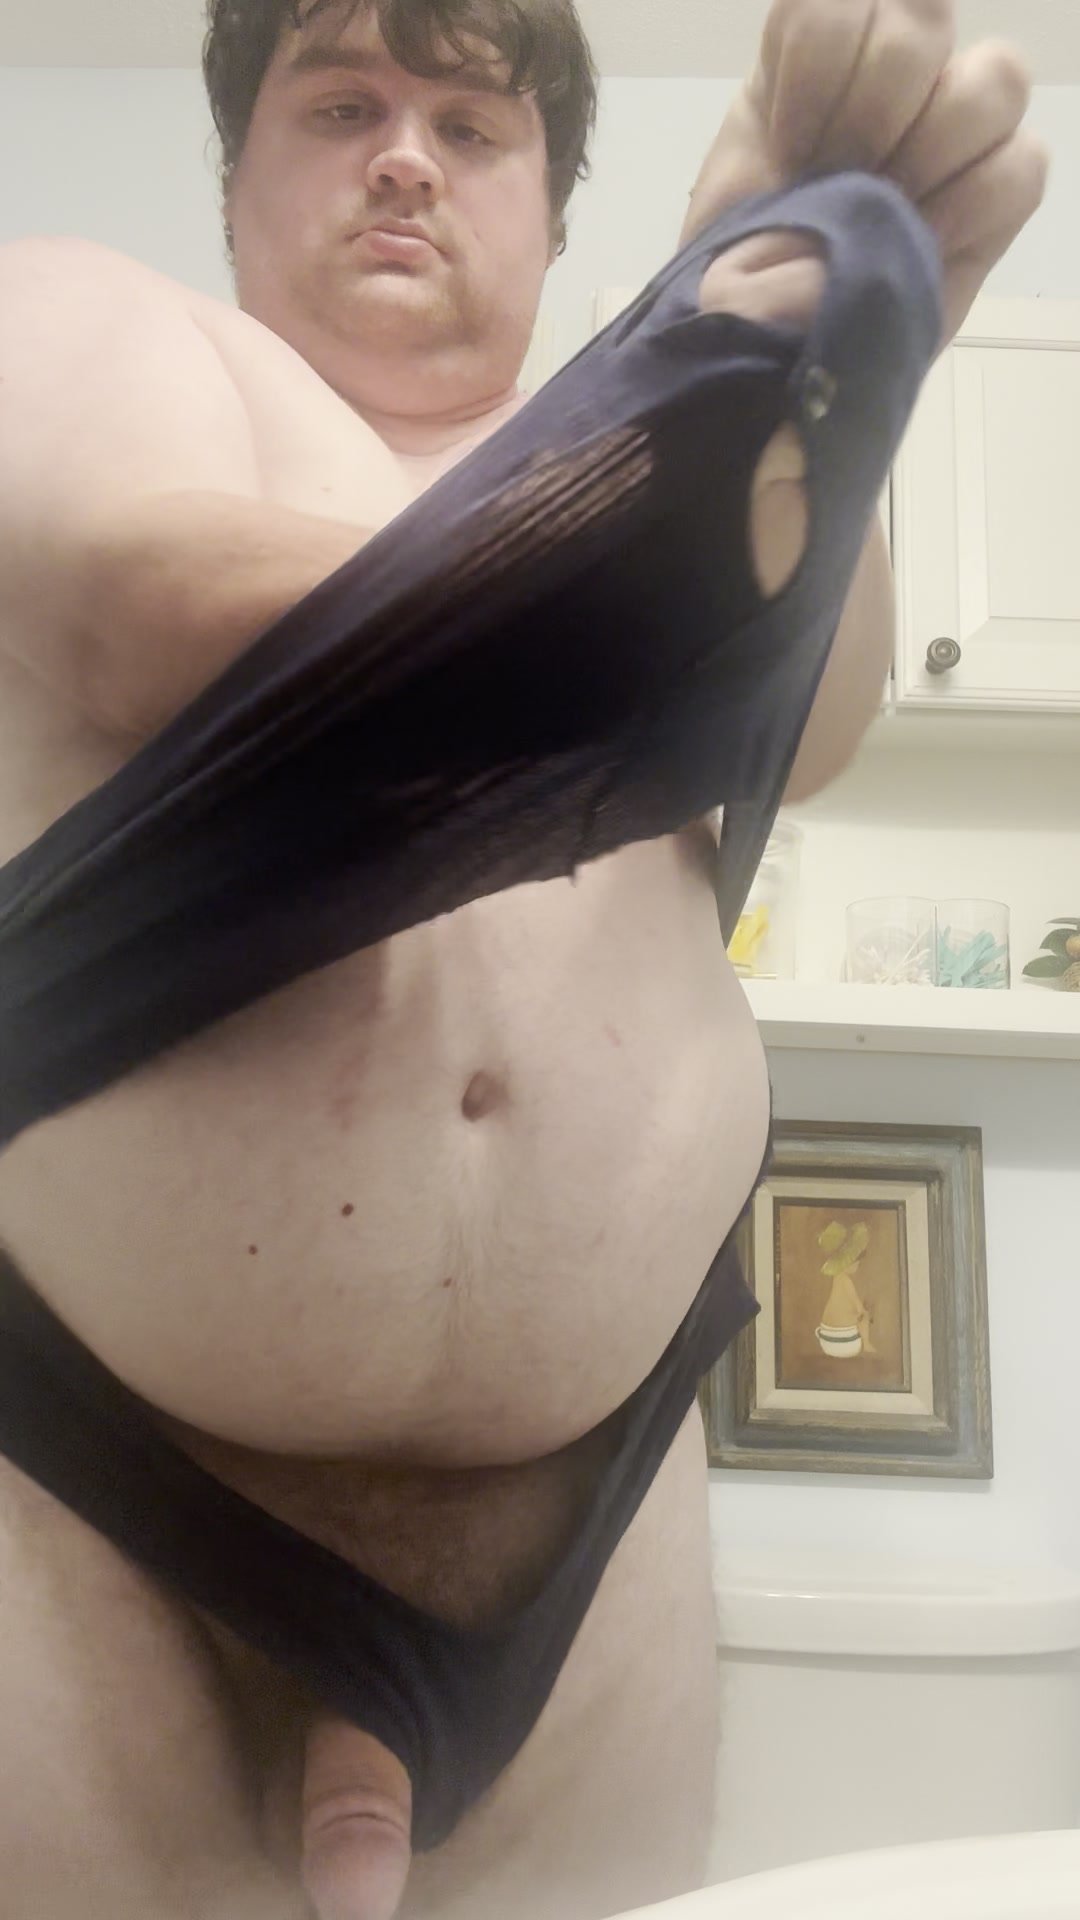 Fat guy gives himself a frontal ripping wedgie